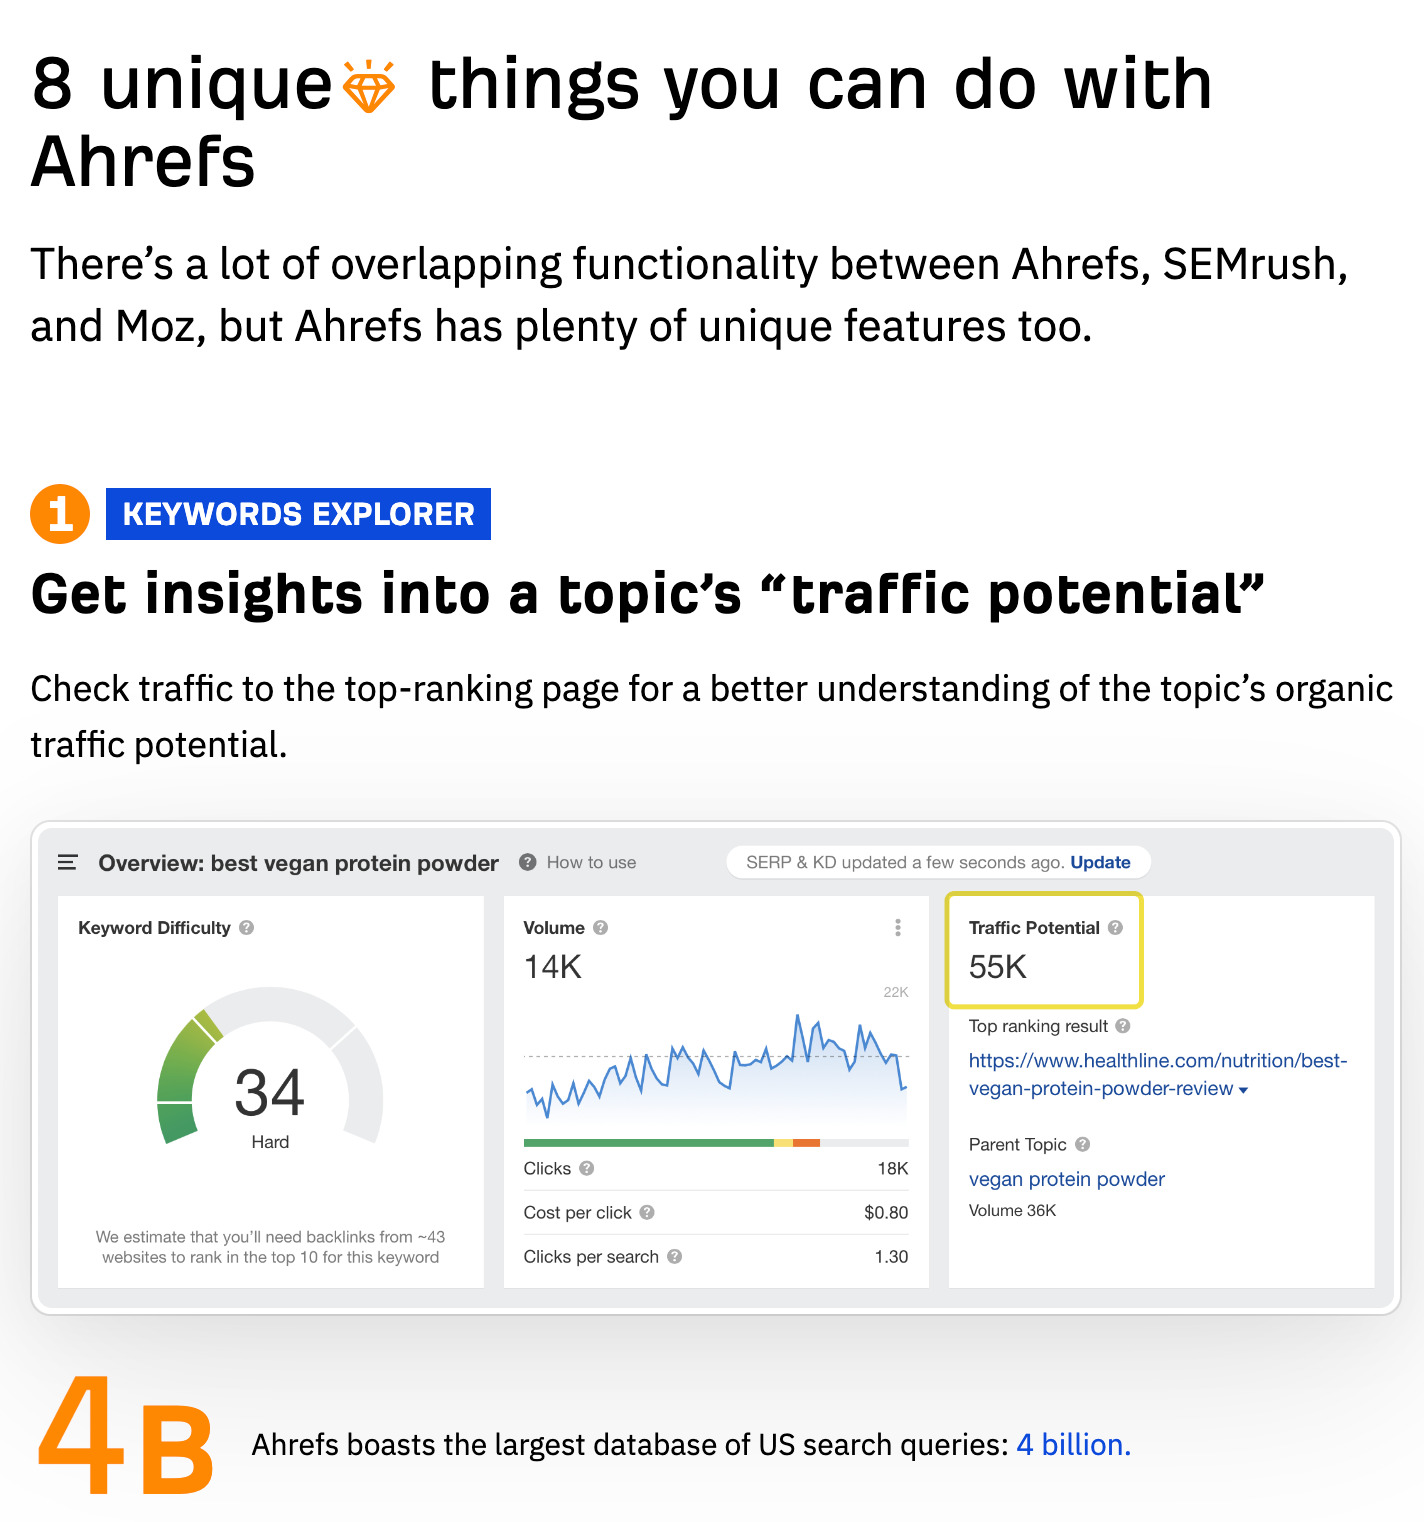 Unique things Ahrefs can do